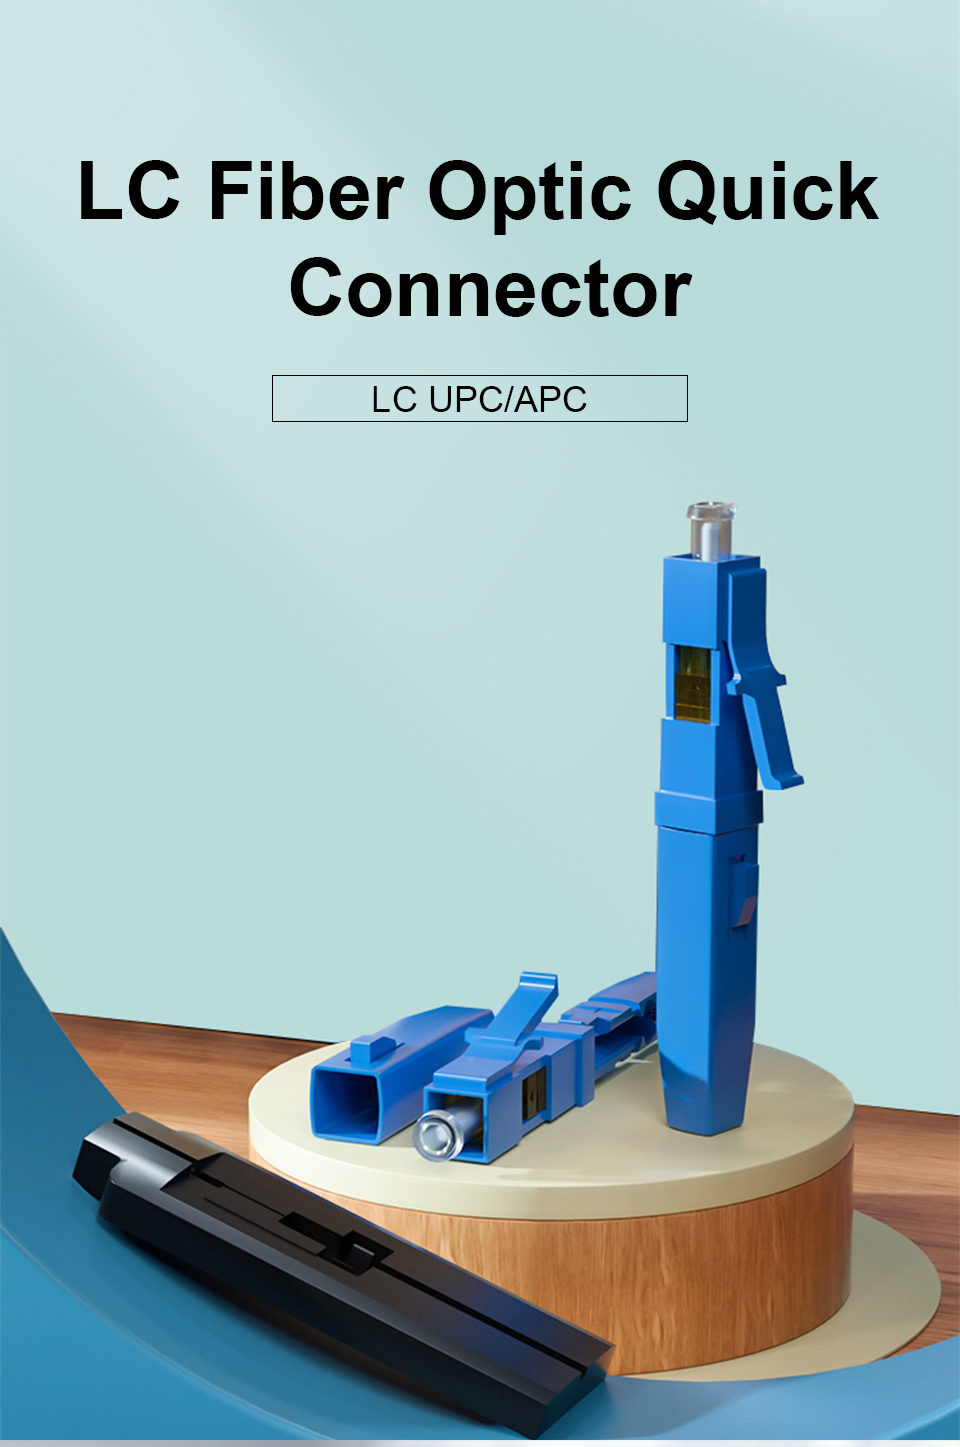 FAST CONNECTOR LC UPC 10 PCS